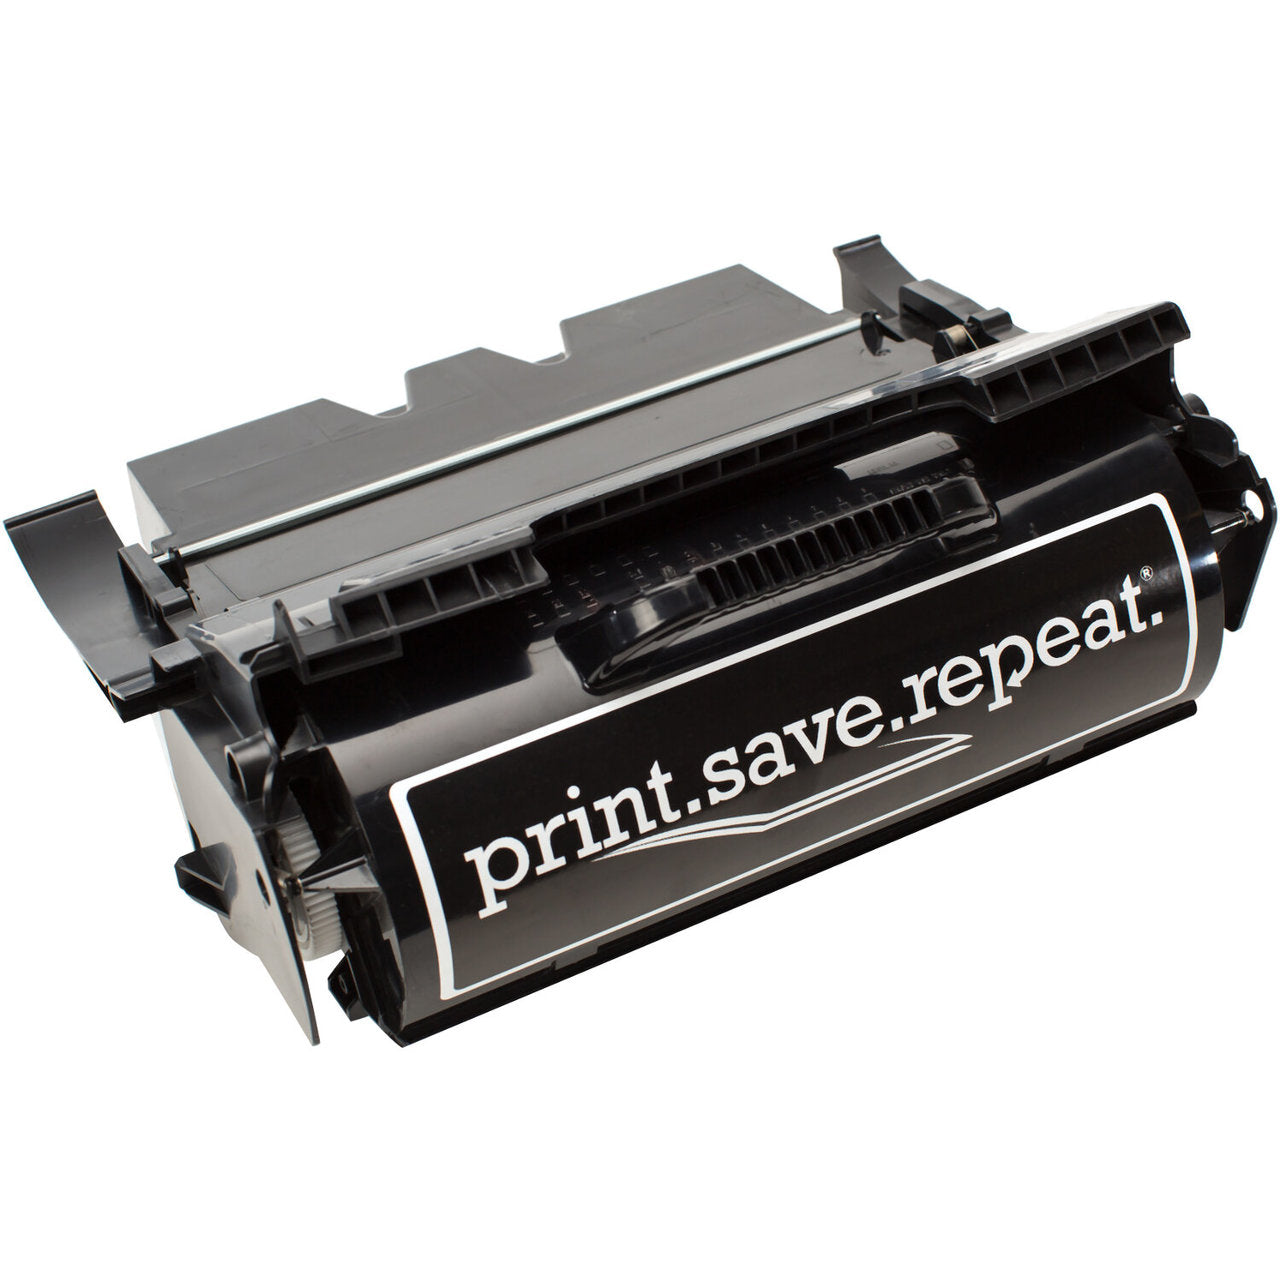 Print.Save.Repeat. Dell HD767 High Yield Remanufactured Toner Cartridge for 5210, 5310 [20,000 Pages]